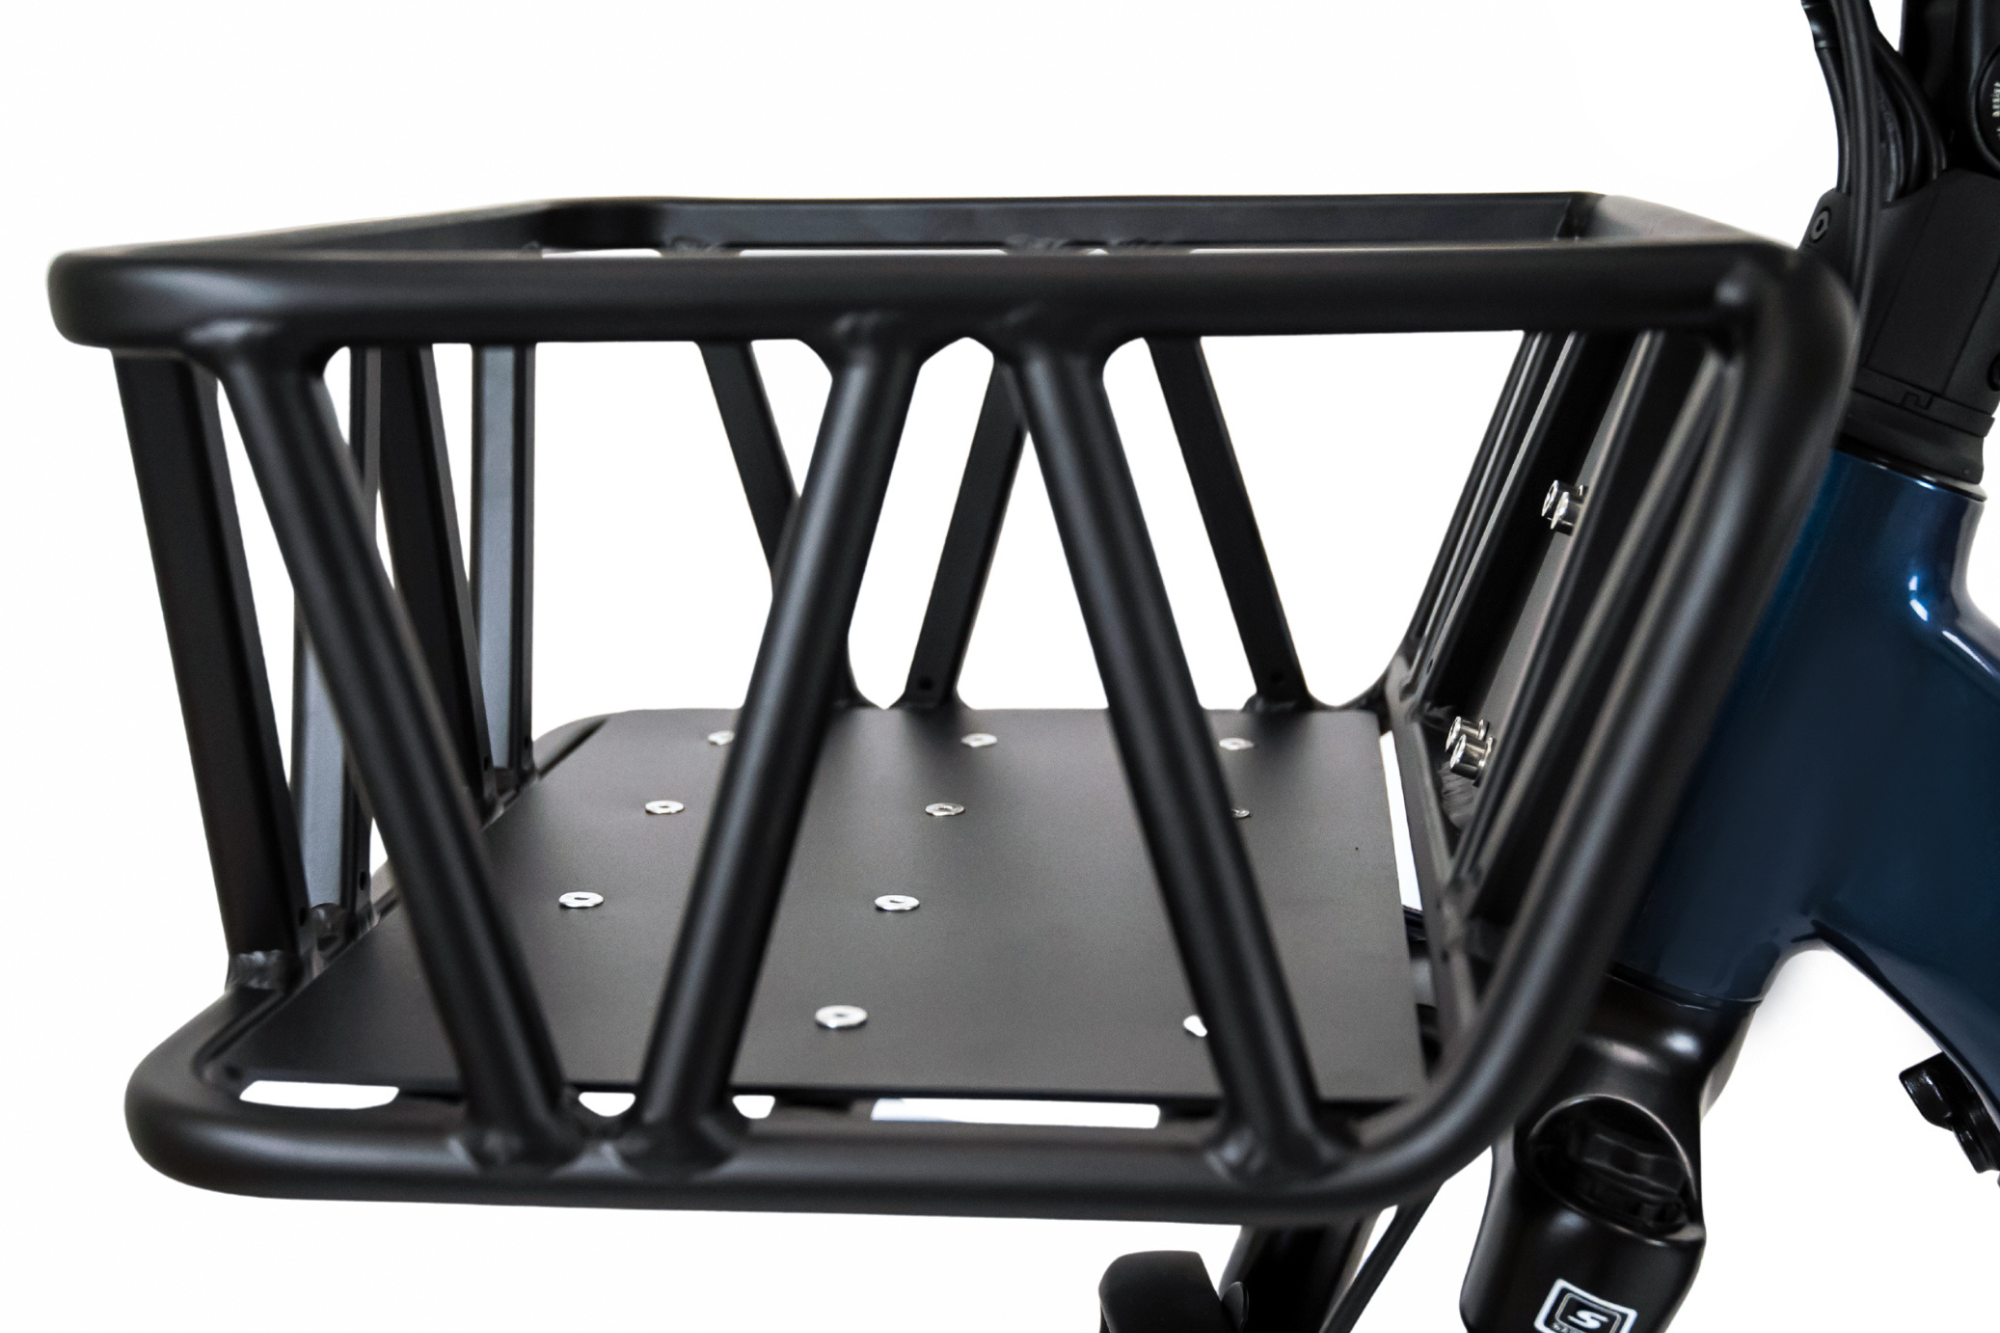 Euphree's front mounted all aluminum basket is lightweight and carries up to 25 lbs of cargo. Hanging out at the beach? Shopping at the market? Planning a picnic? Whether it's your wet suit, fishing gear or groceries, keep it